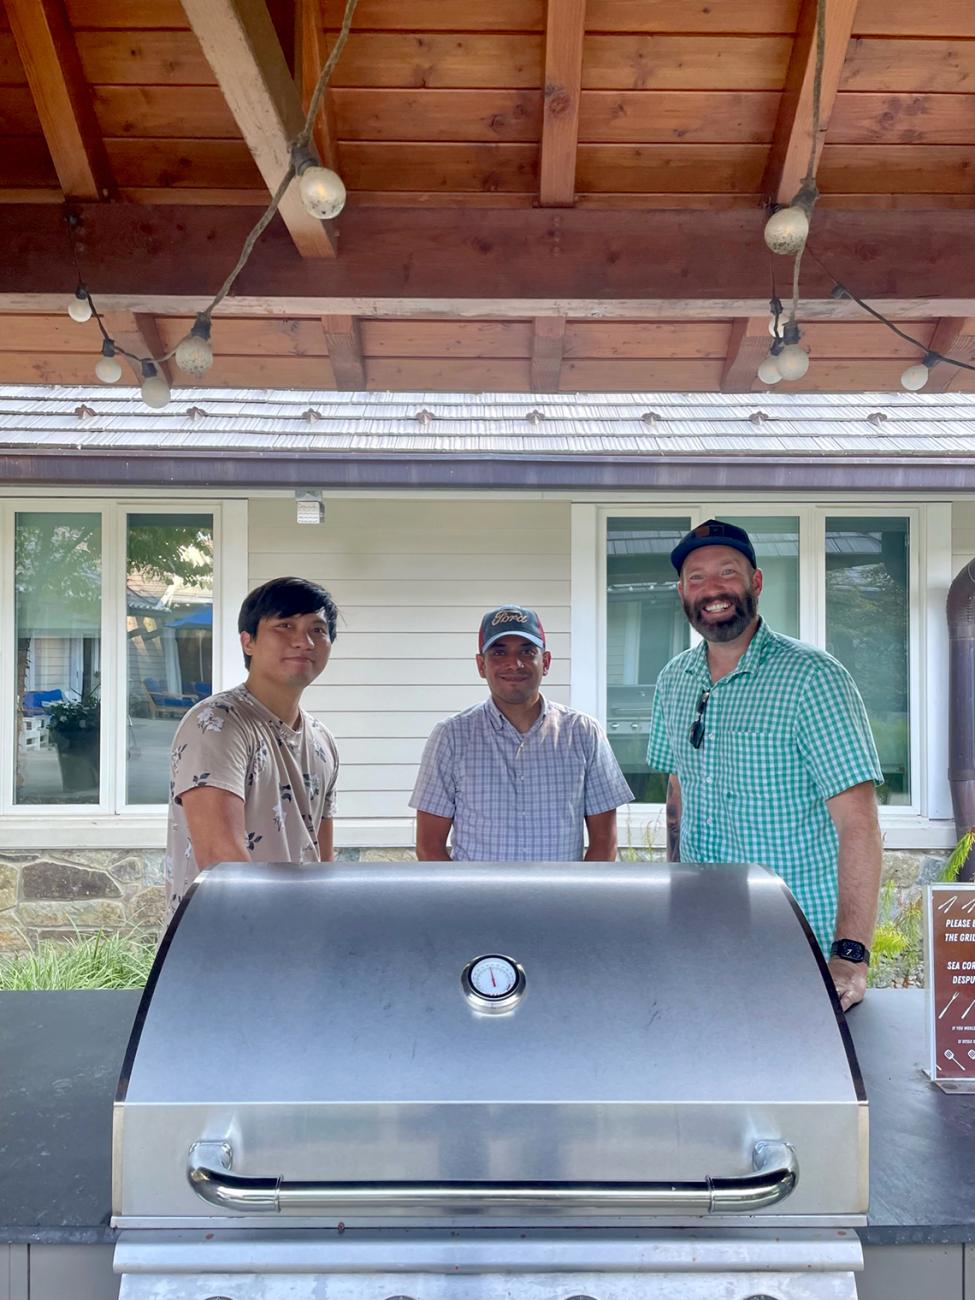 Three men stand behind an outdoor grill.